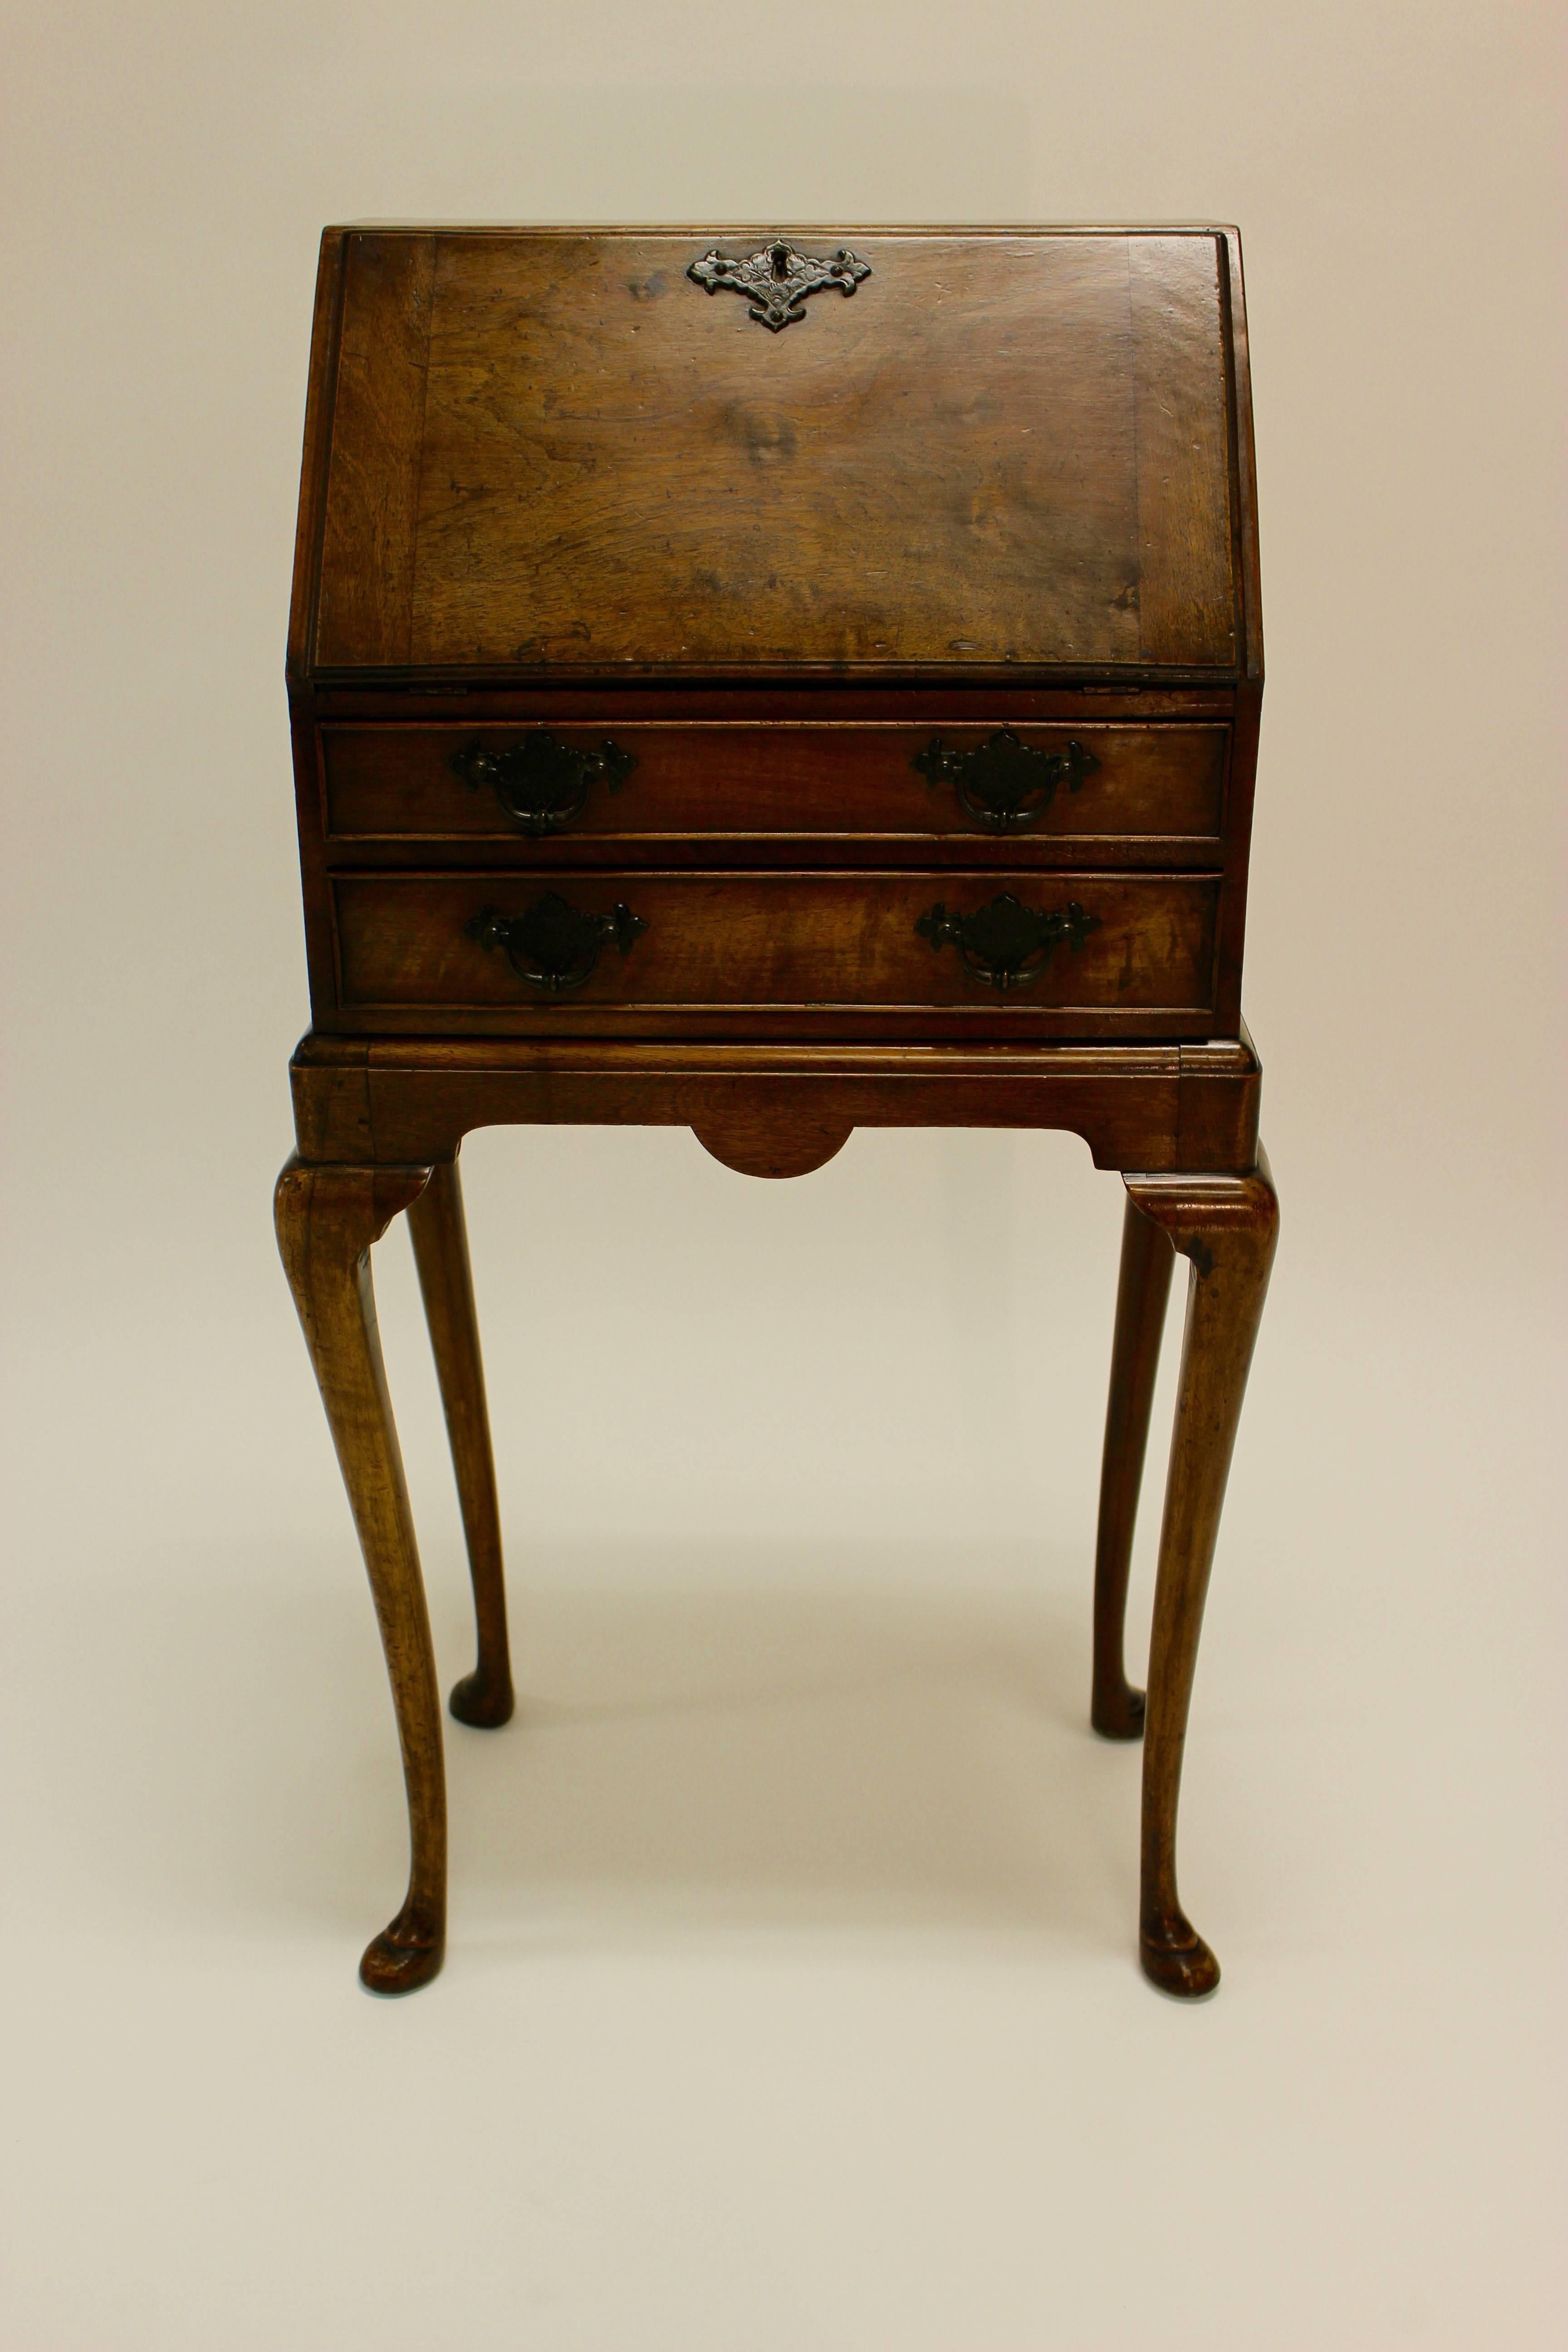 A late 19th century Queen Anne style small walnut mini slant front desk on stand resting on graceful cabriole legs ending in pad feet. The slant drop front, topped with a Chippendale bat-wings keyhole escutcheon nicely enhancing the figured walnut